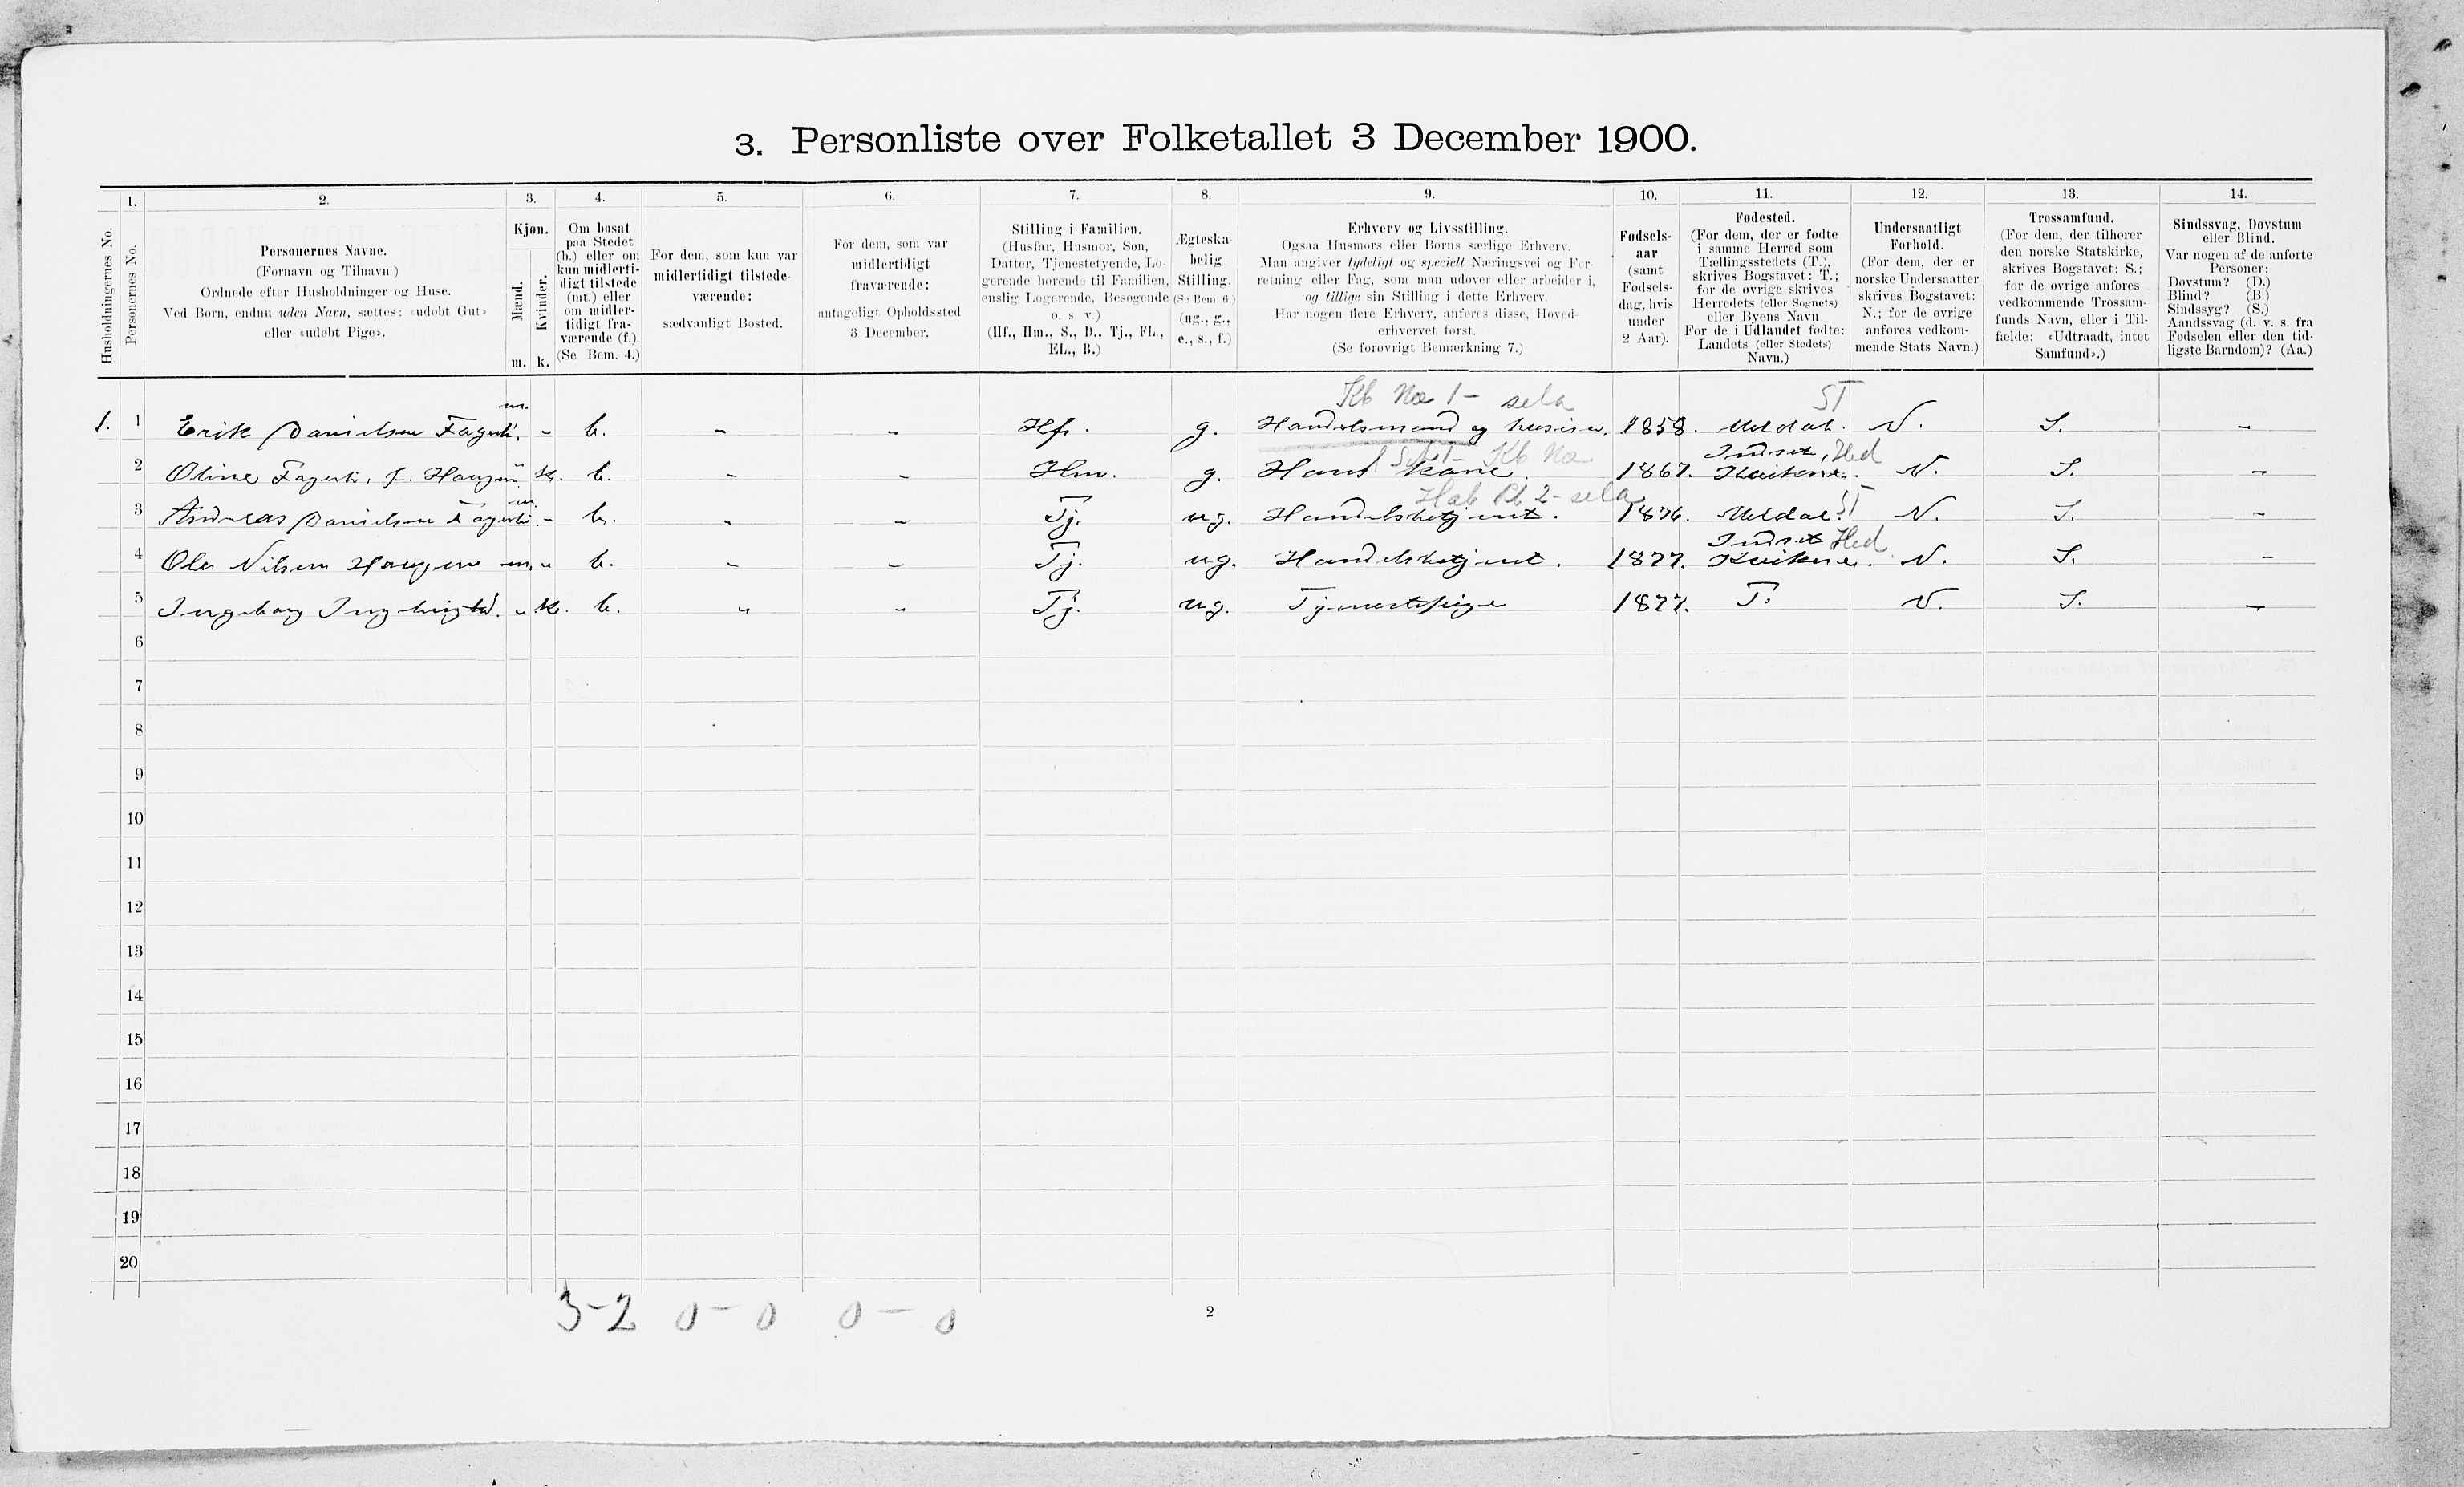 SAT, 1900 census for Orkdal, 1900, p. 714